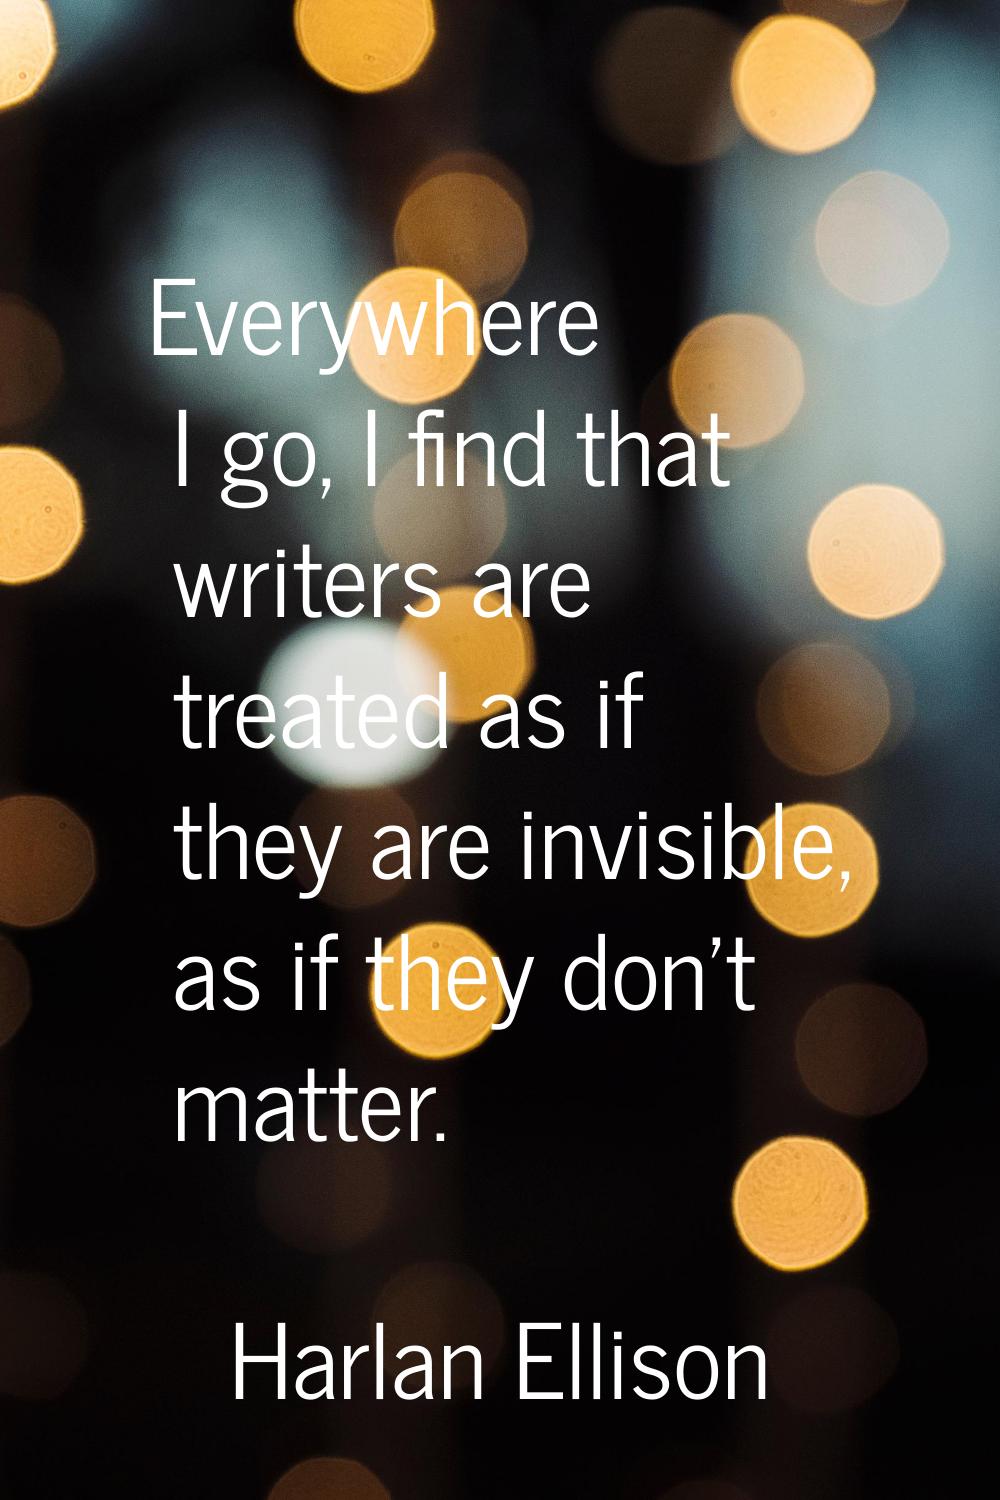 Everywhere I go, I find that writers are treated as if they are invisible, as if they don't matter.